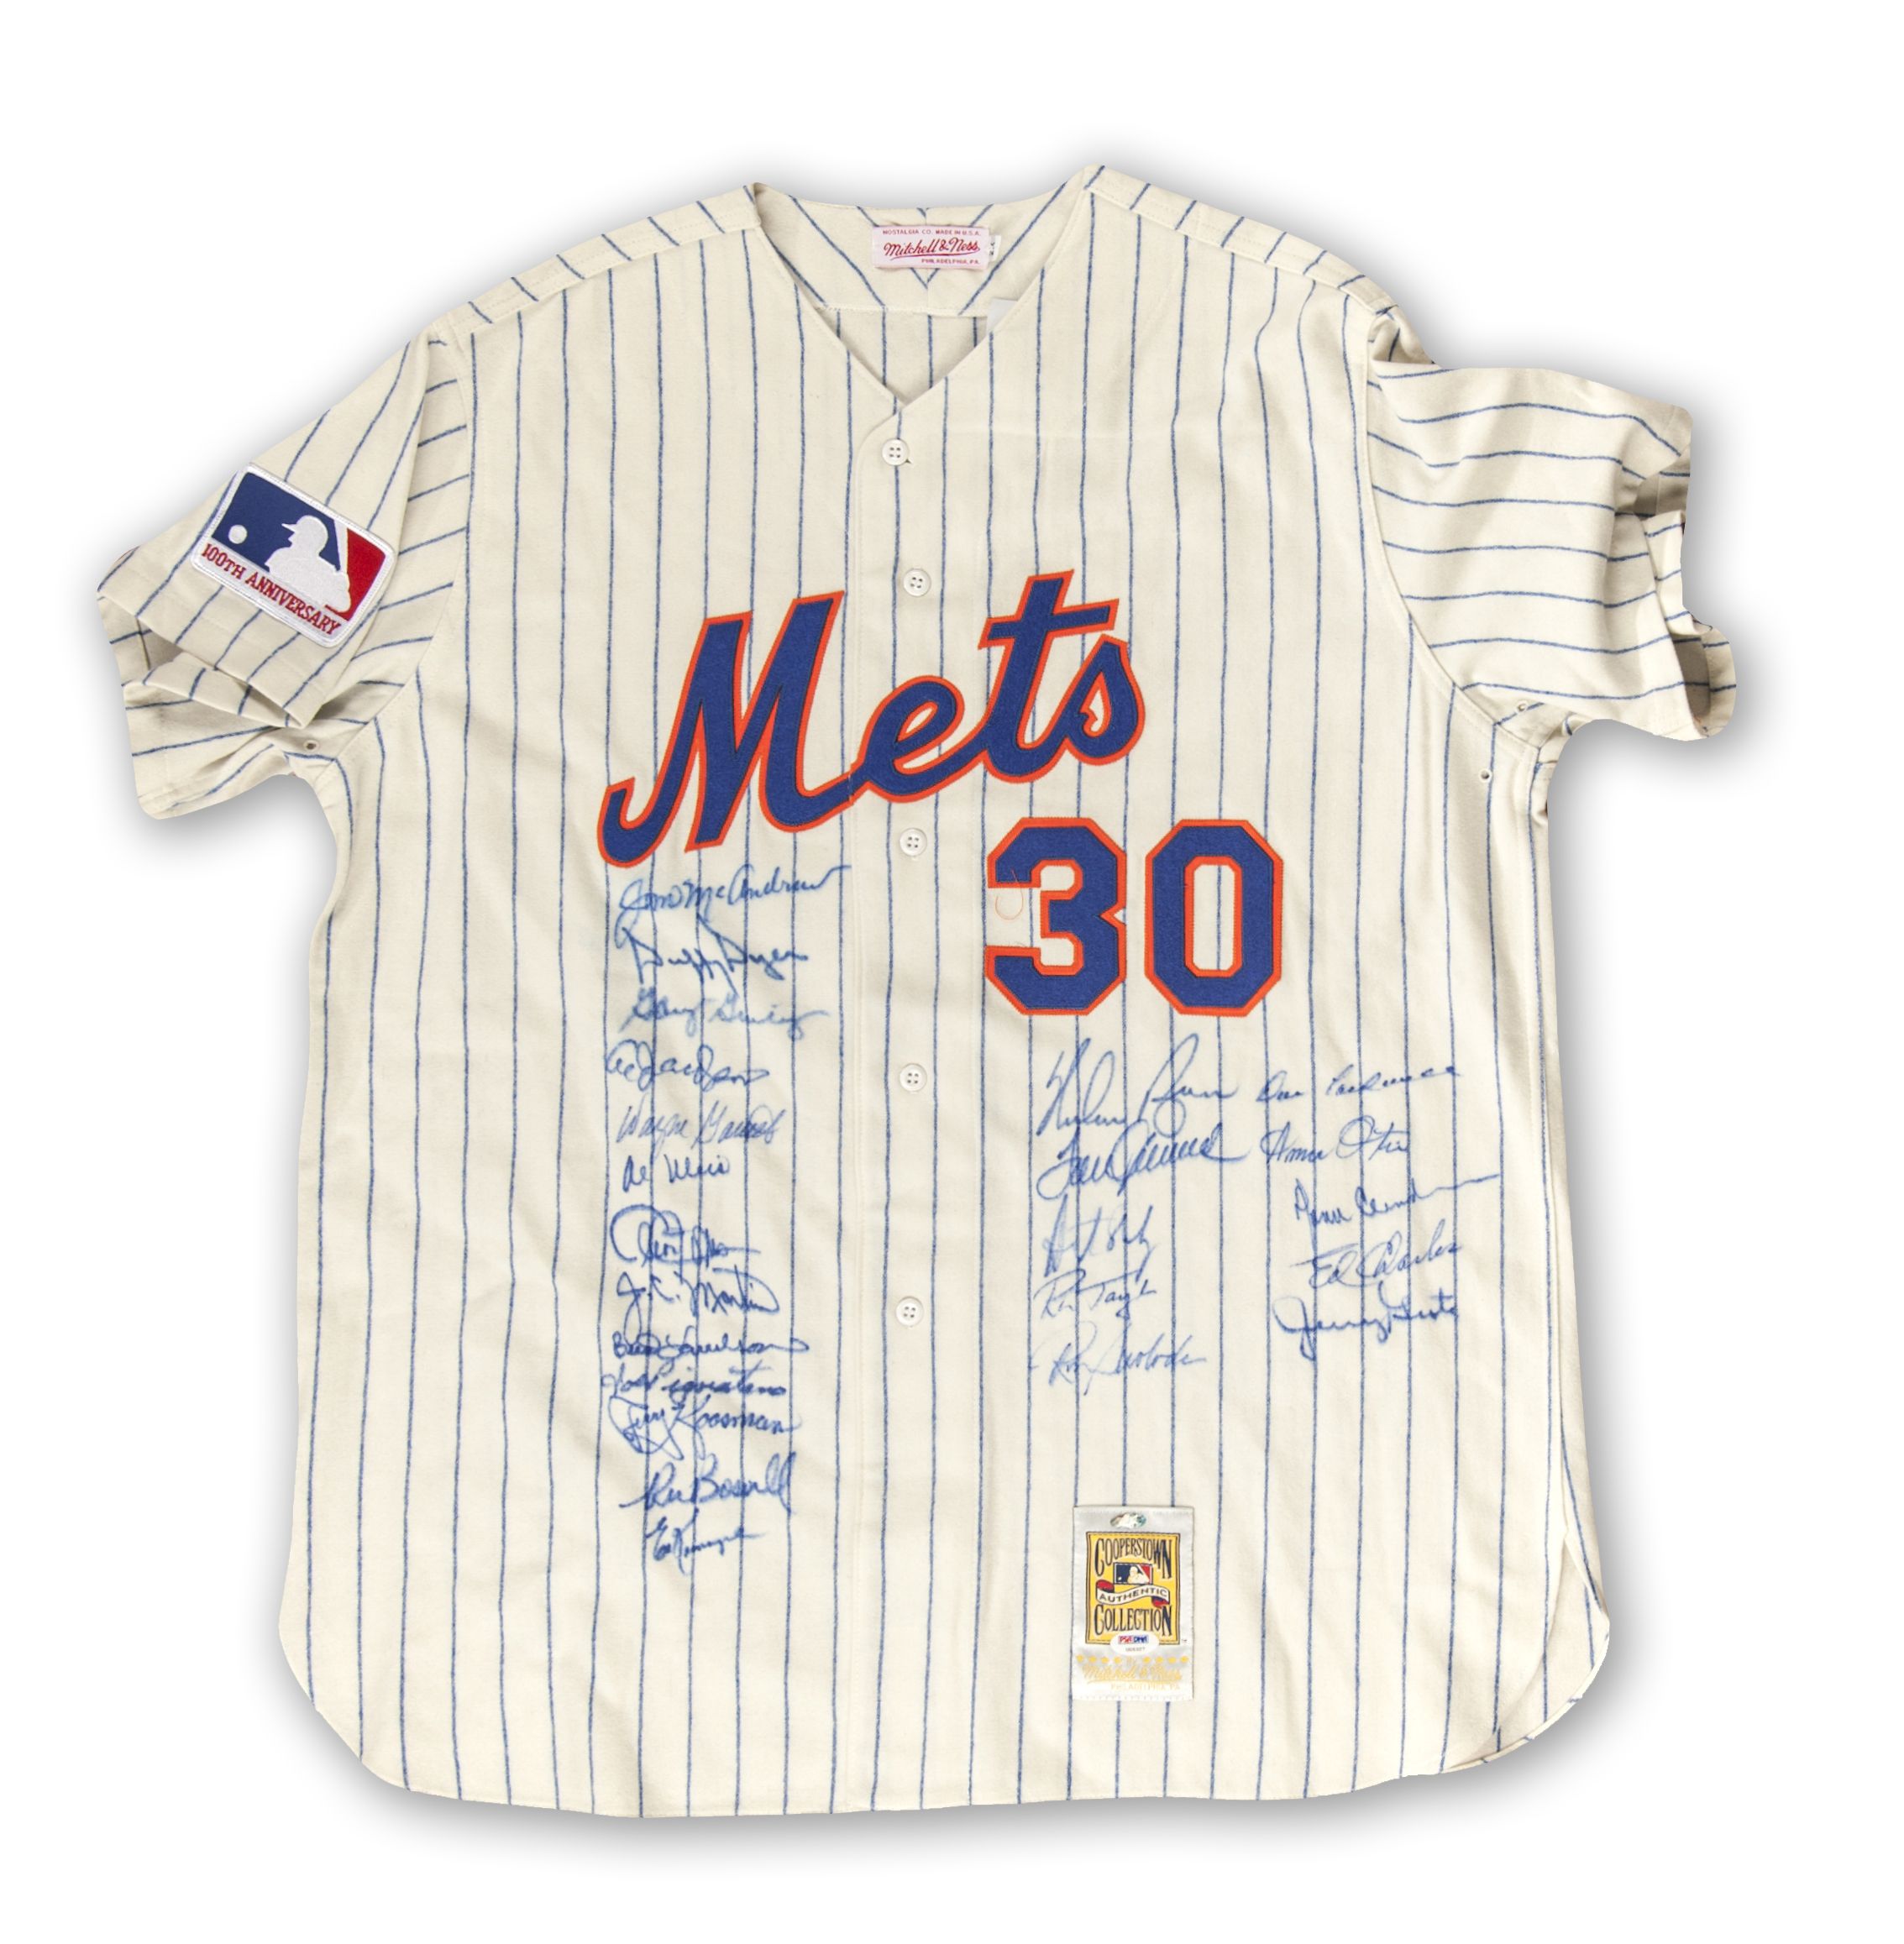 Rod Gaspar #17 - White Pinstripe Jersey - 50th Anniversary of the